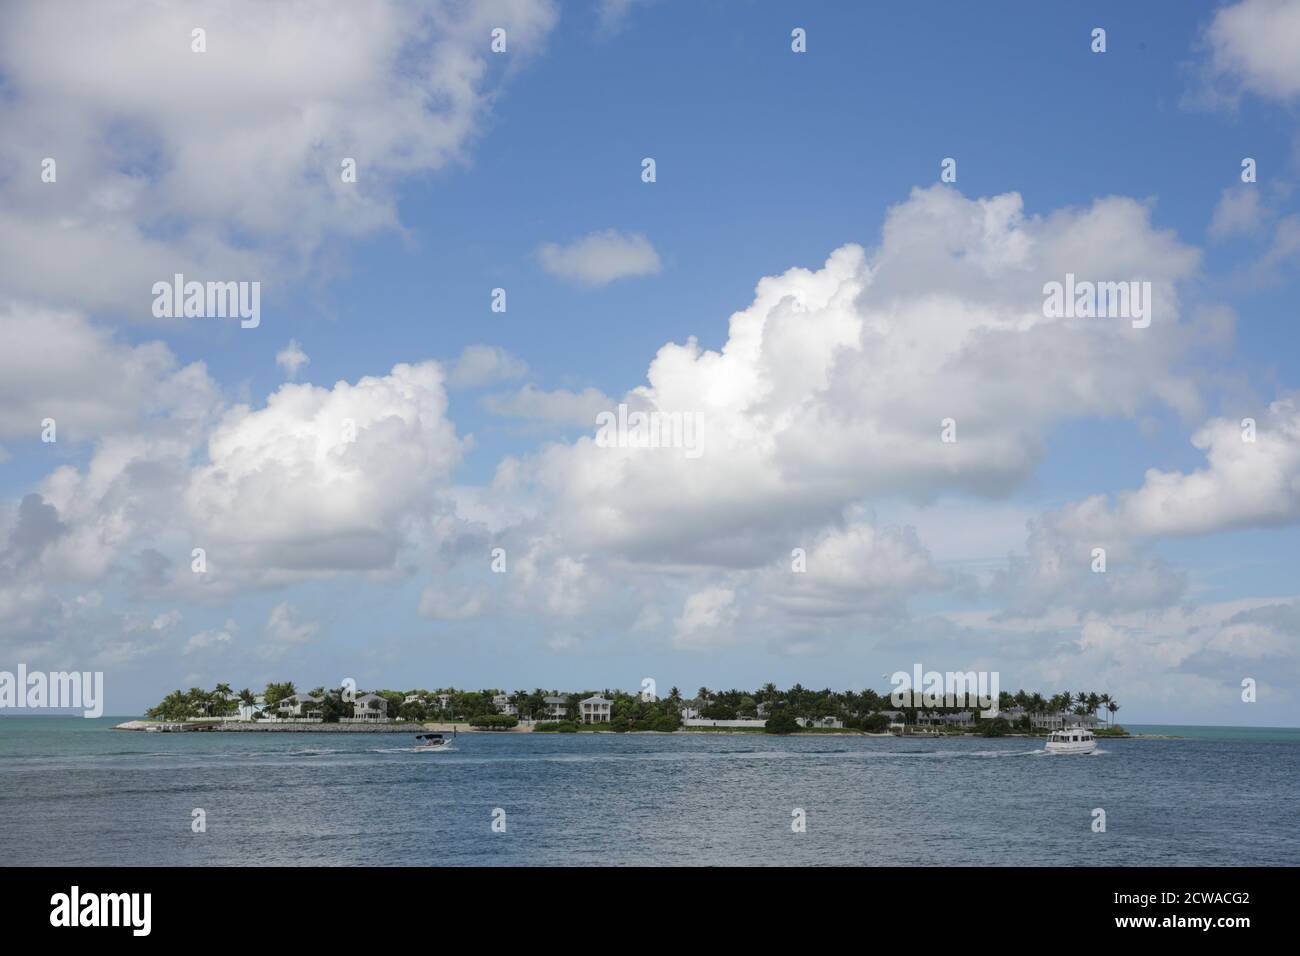 Seascape from Sunset Pier, Key West Florida Stock Photo